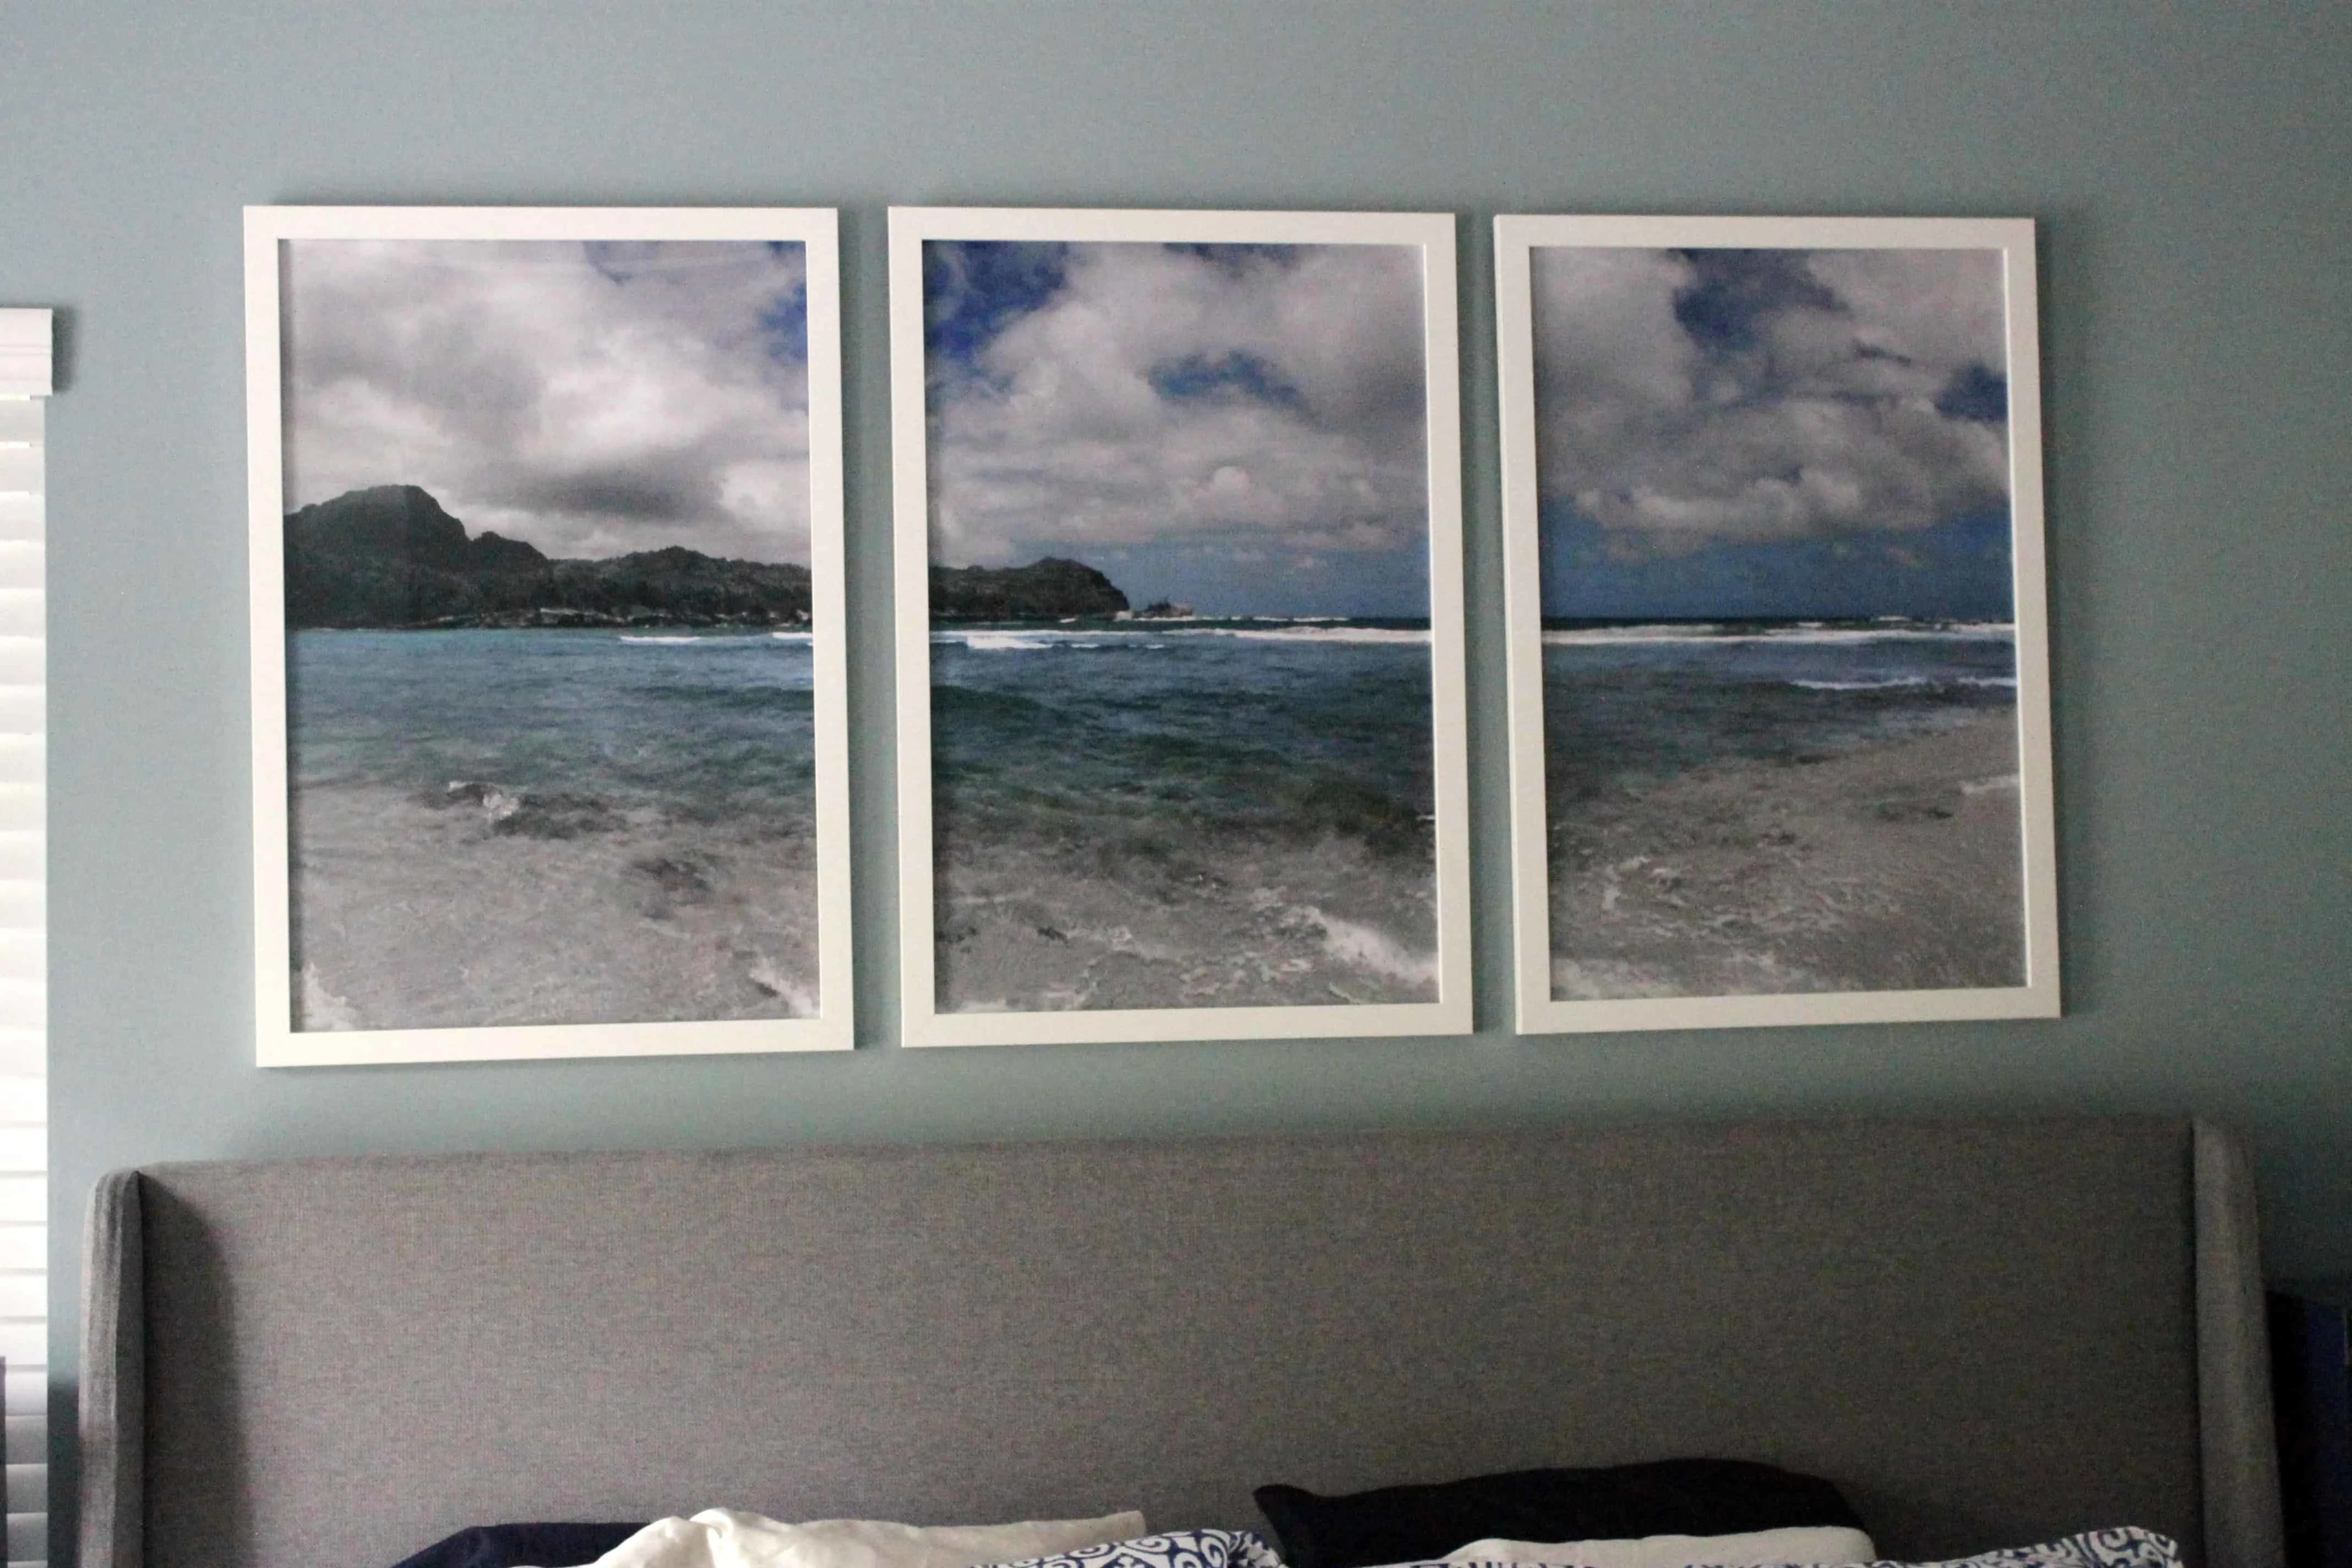 Gorgeous Kauai Photo Triptych Over the Bed - Charleston Crafted